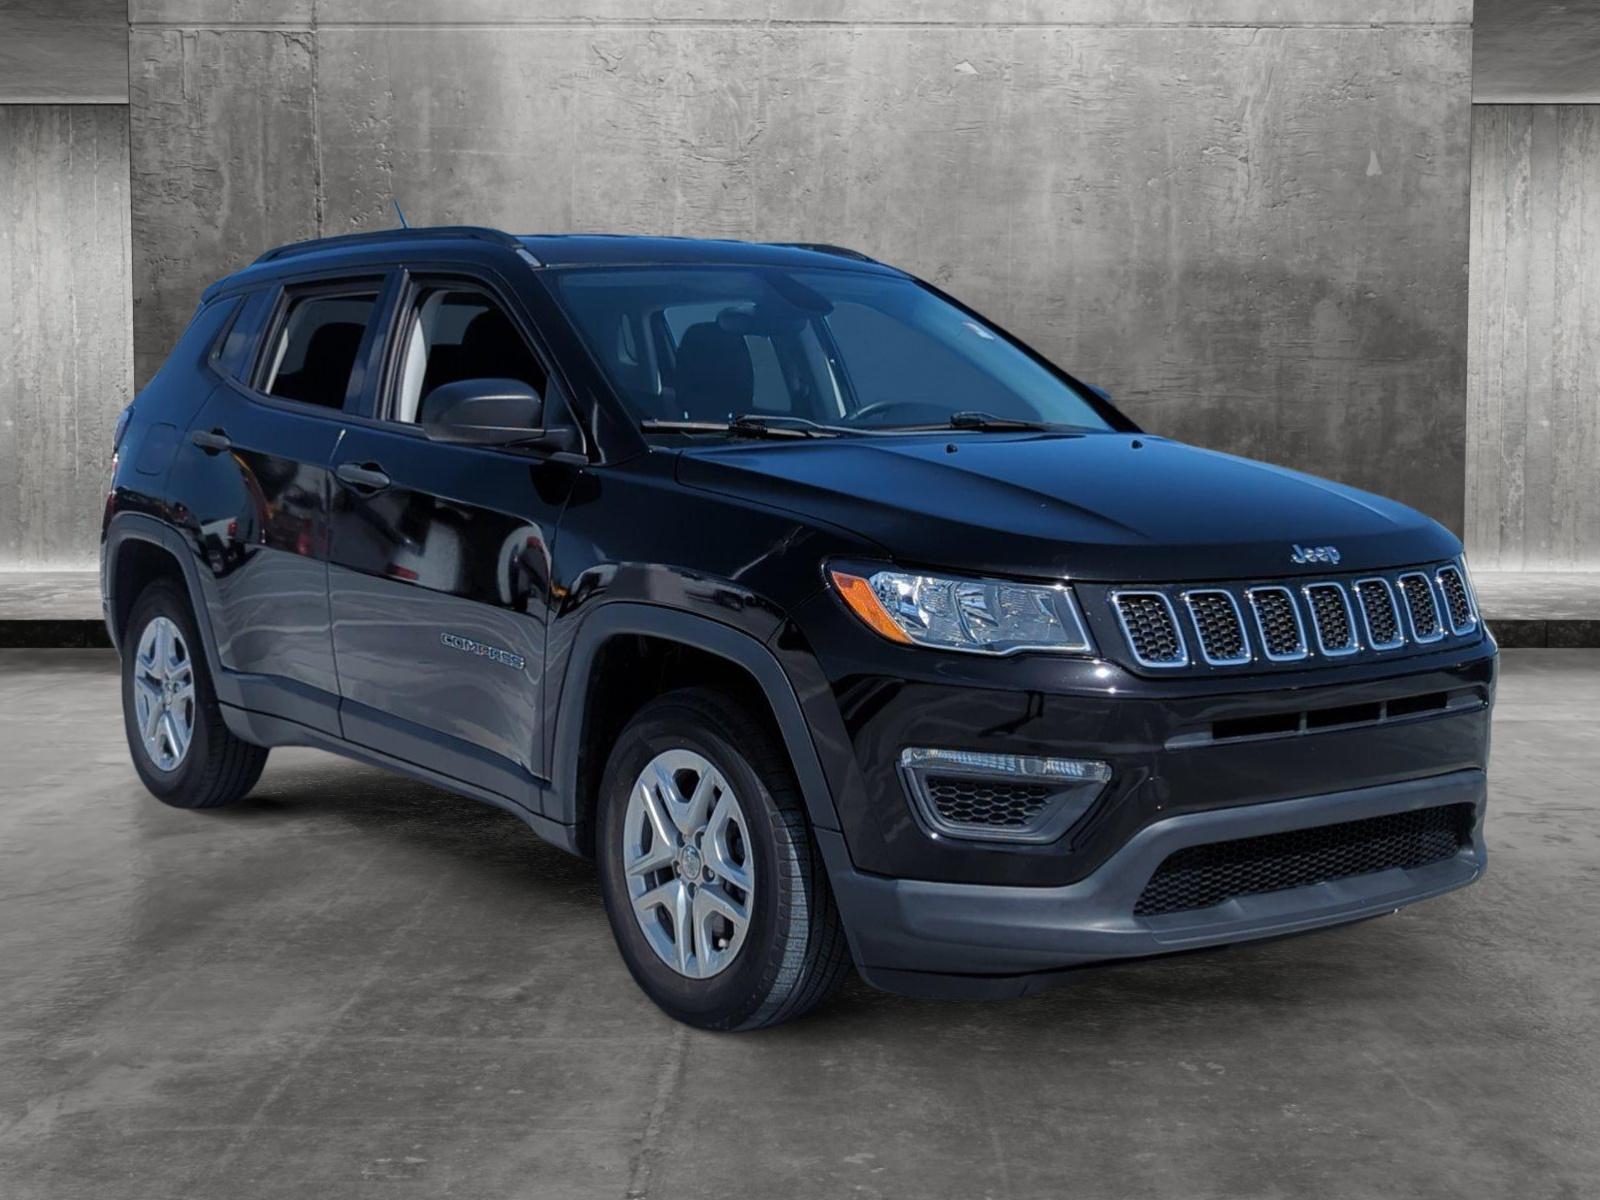 2018 Jeep Compass Vehicle Photo in Ft. Myers, FL 33907